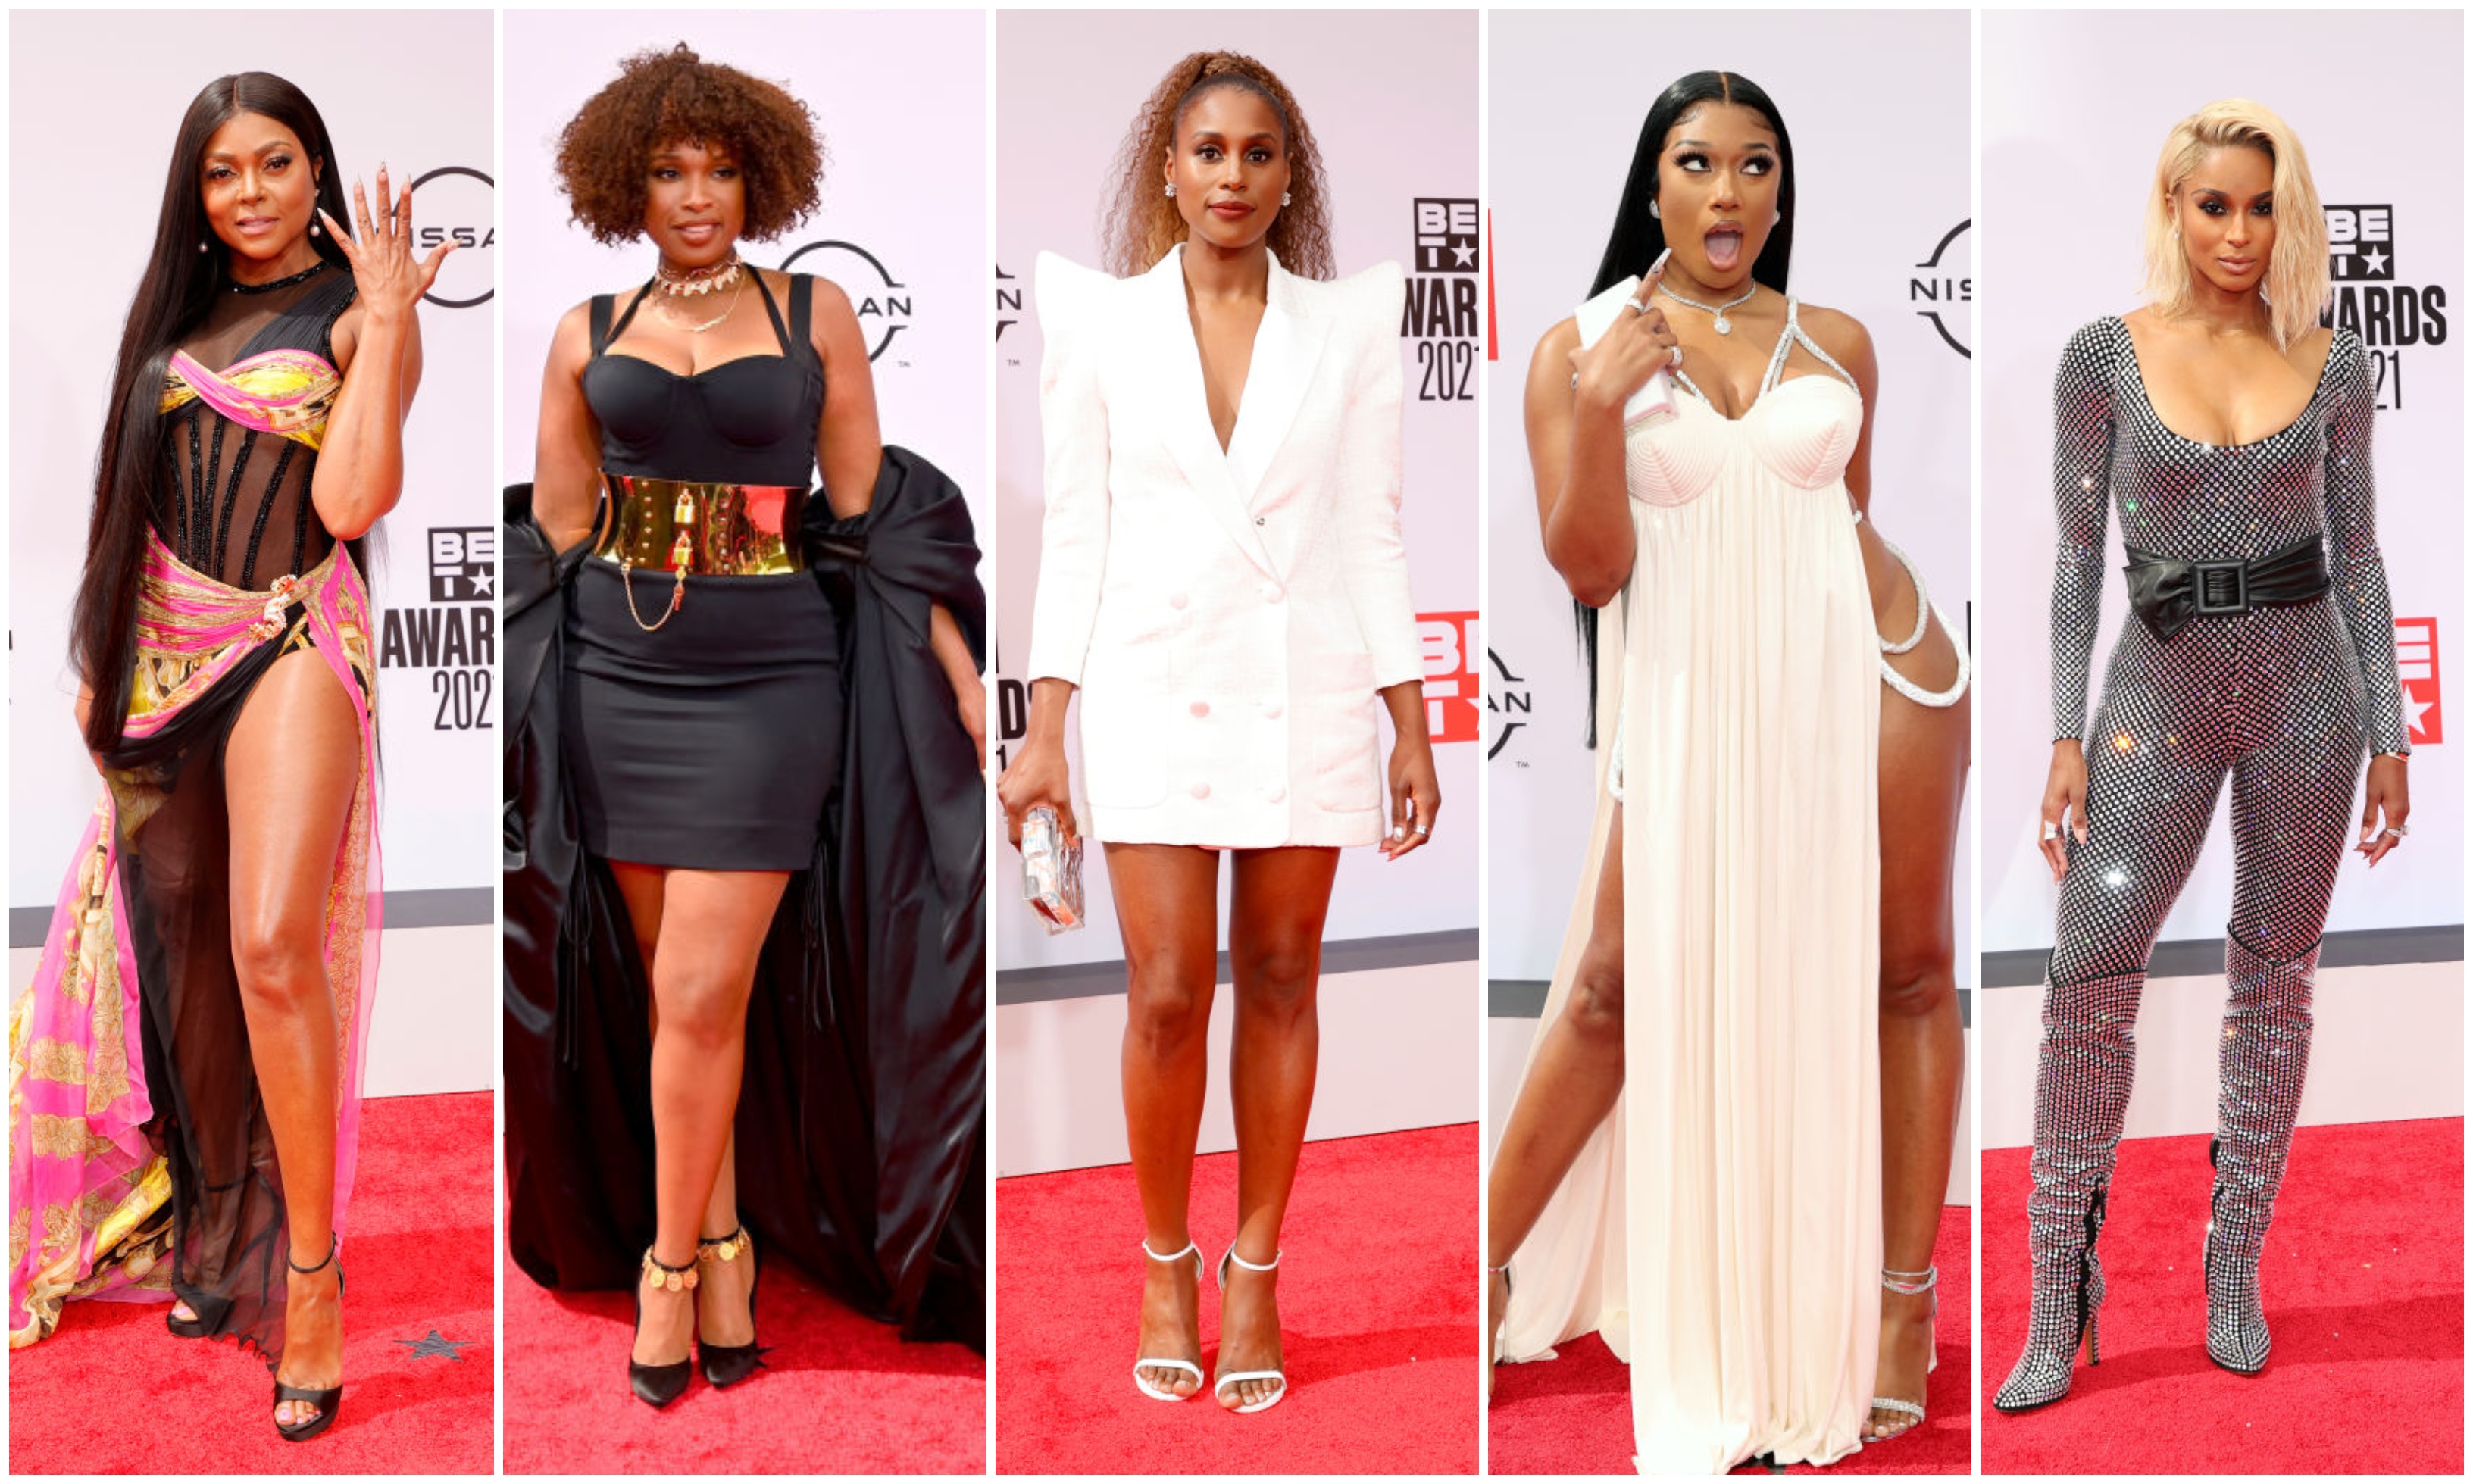 Photos from BET Awards 2022 Red Carpet Fashion